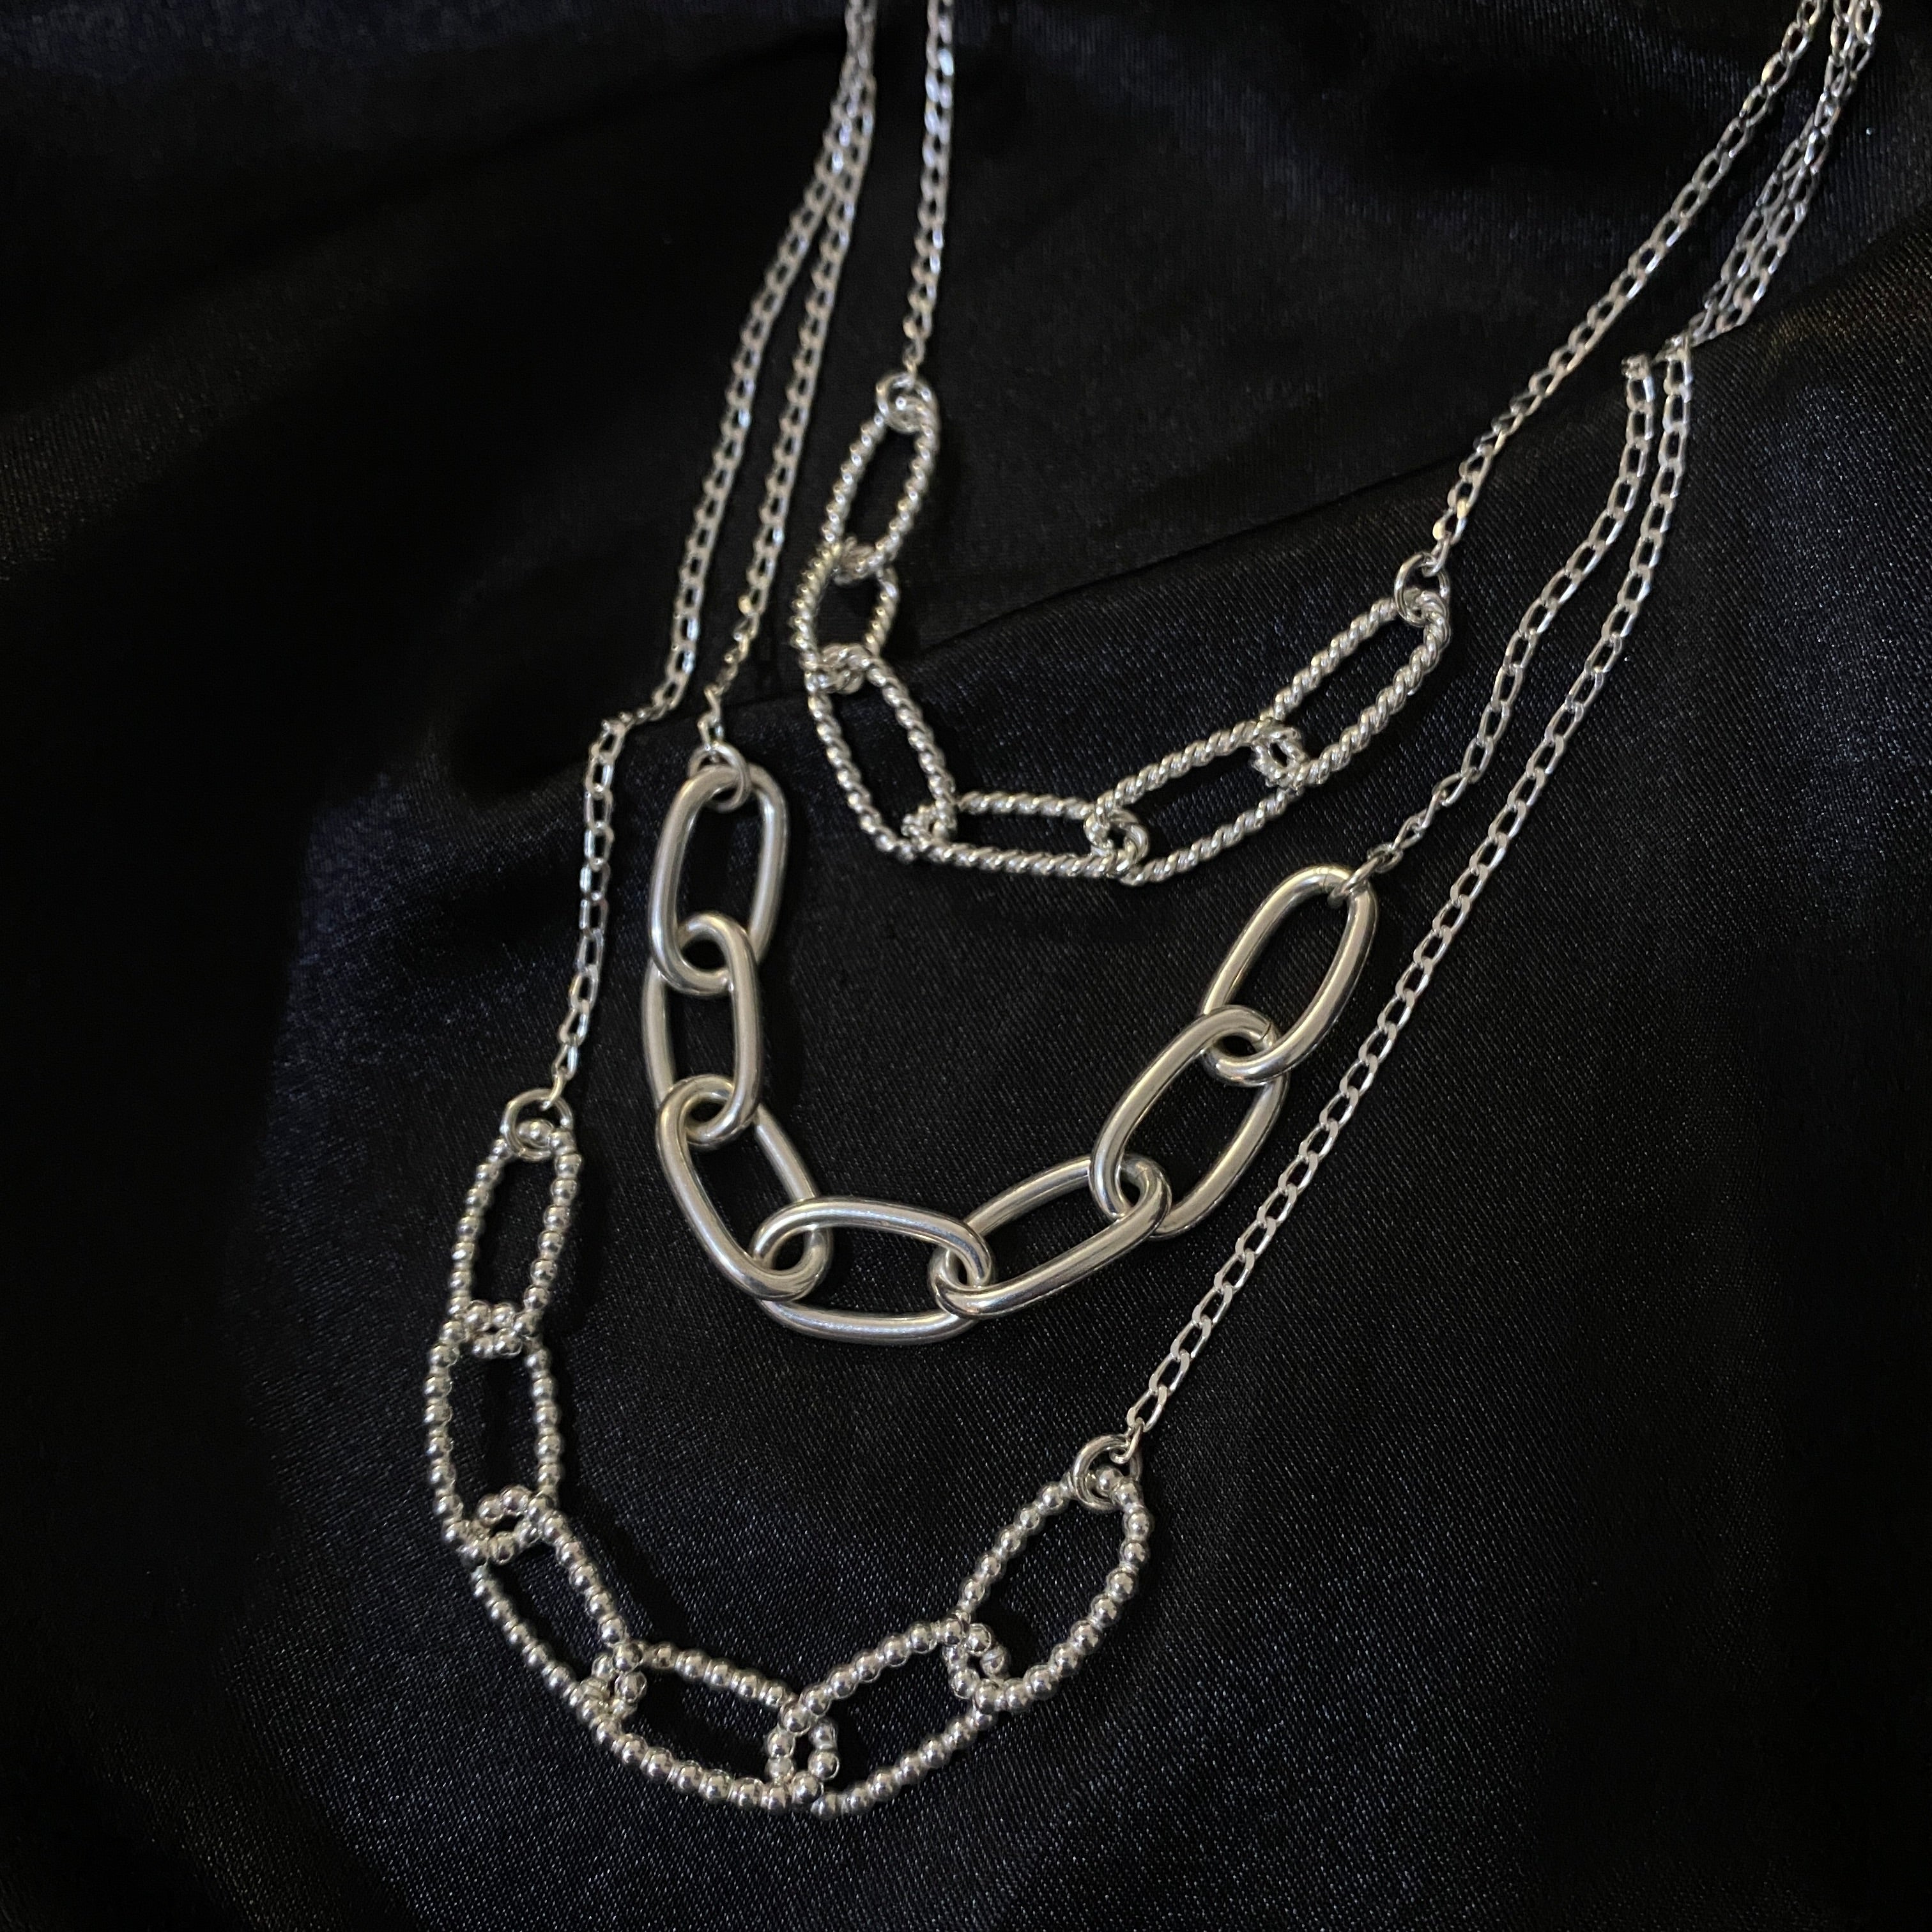 Chain Link Necklace.